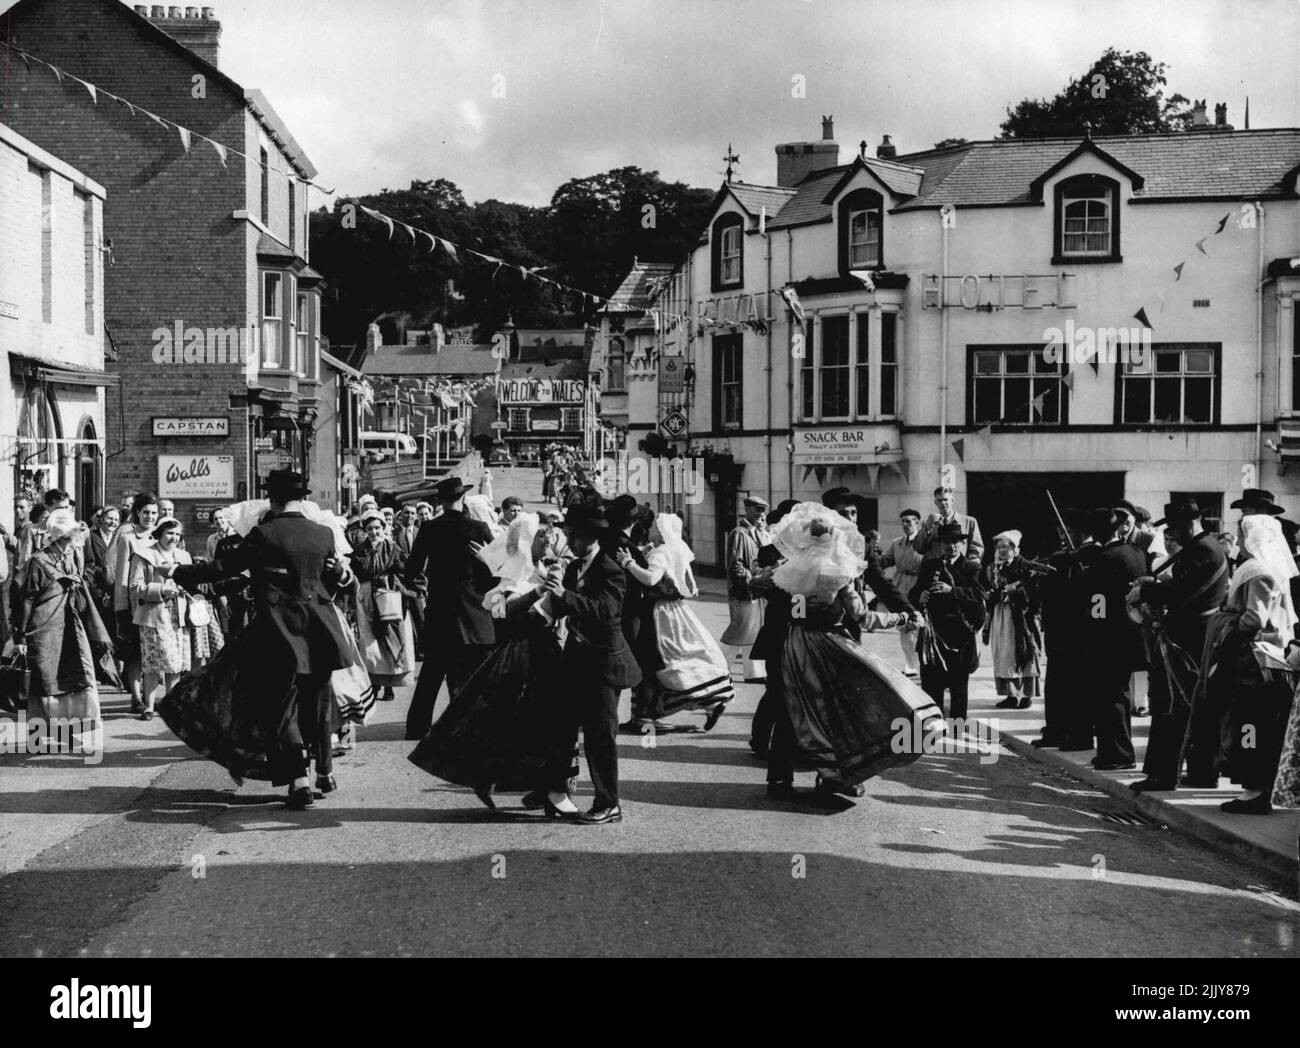 On And On They Danced -- Through the streets of Llangollen, Wales, dance the members of the 'L'Ecole Ventadour' of Tulle, France. They are giving the Townsfolk a ***** of the dancers they will perform ***** the International Eisteddfod which ***** at Llangollen yesterday. July 8, 1954. (Photo by Paul Popper, Paul Popper Ltd.) Stock Photo